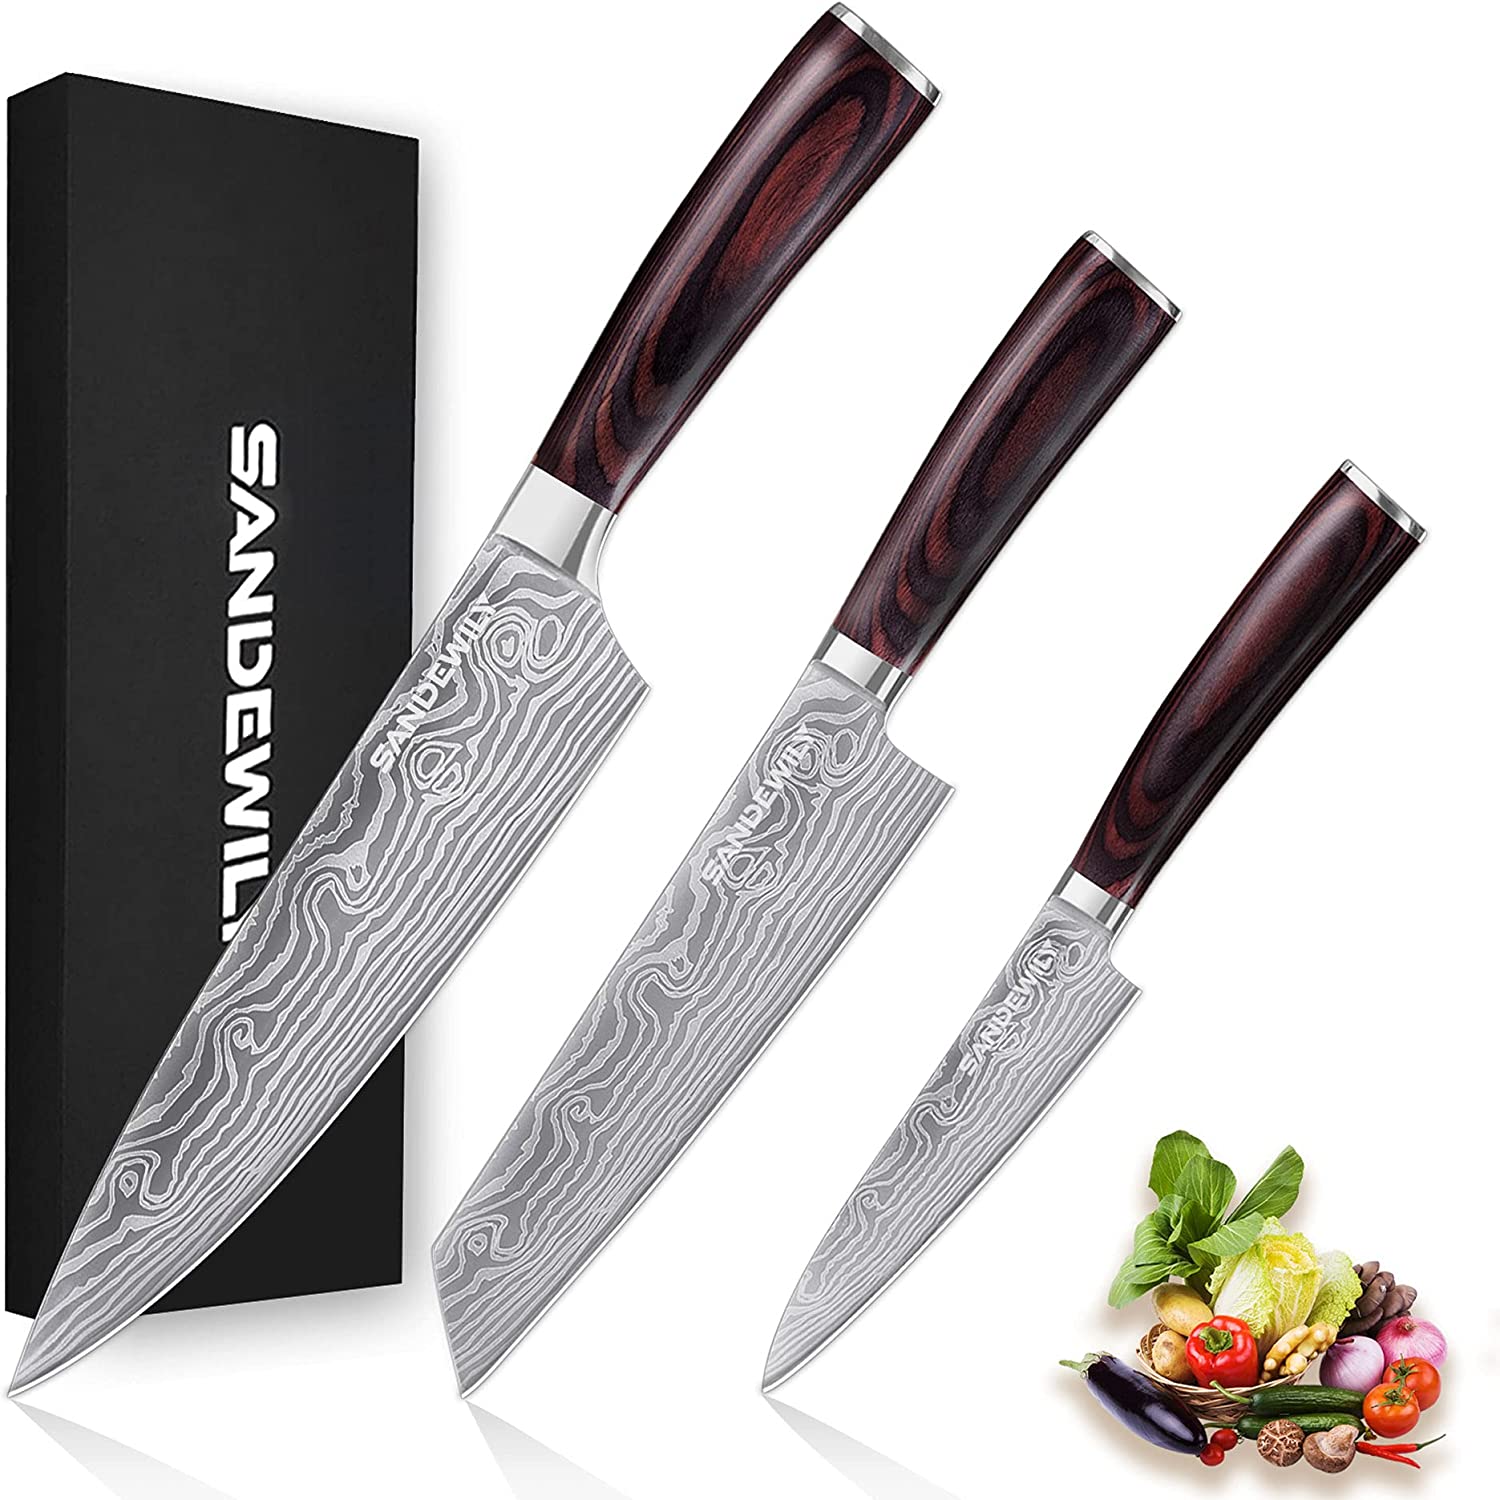 SANDEWILY Professional Kitchen Knives